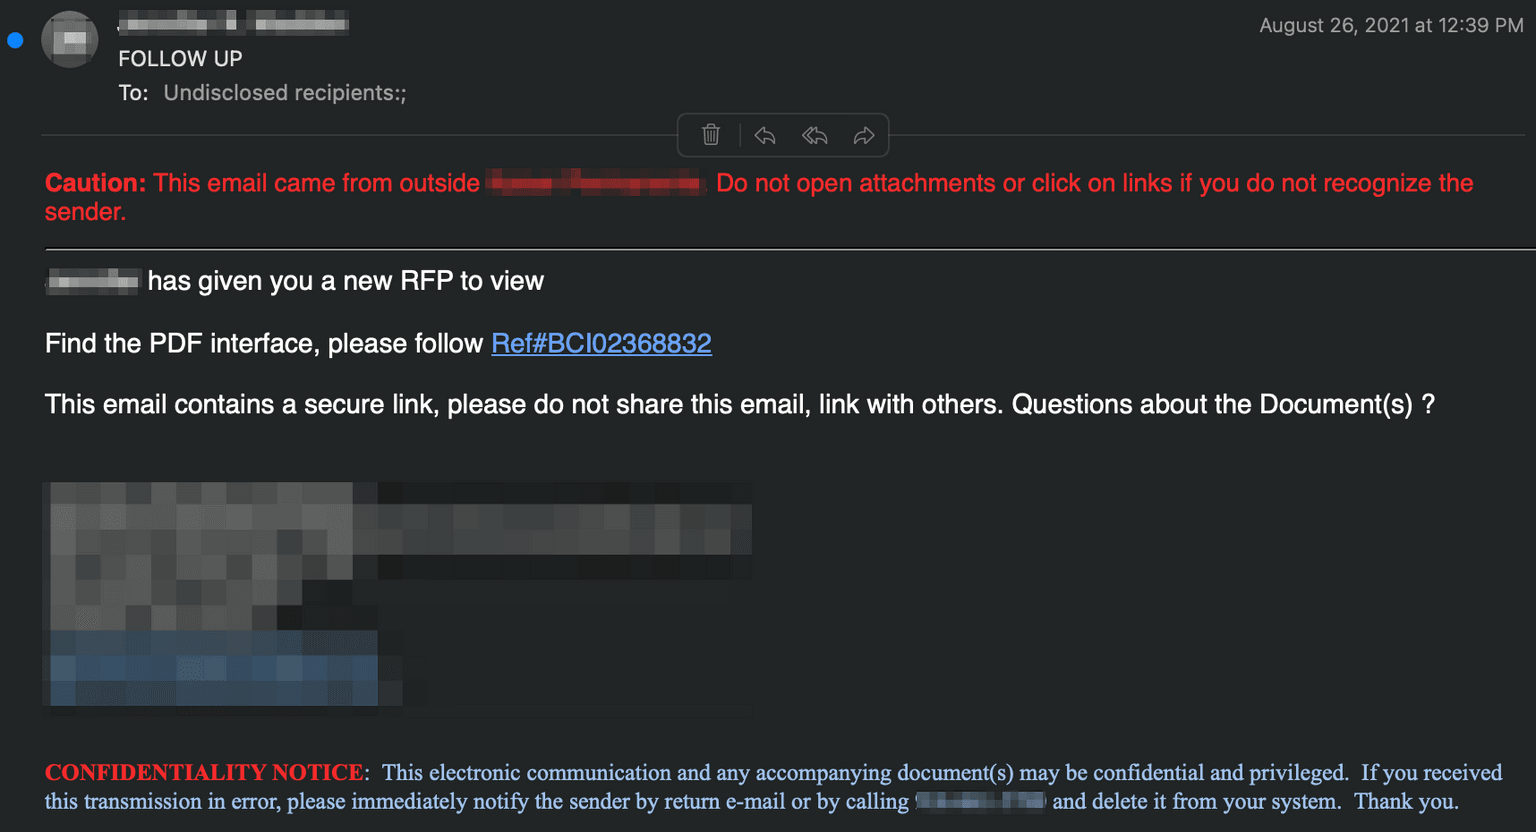 Confluence spear phishing attack email